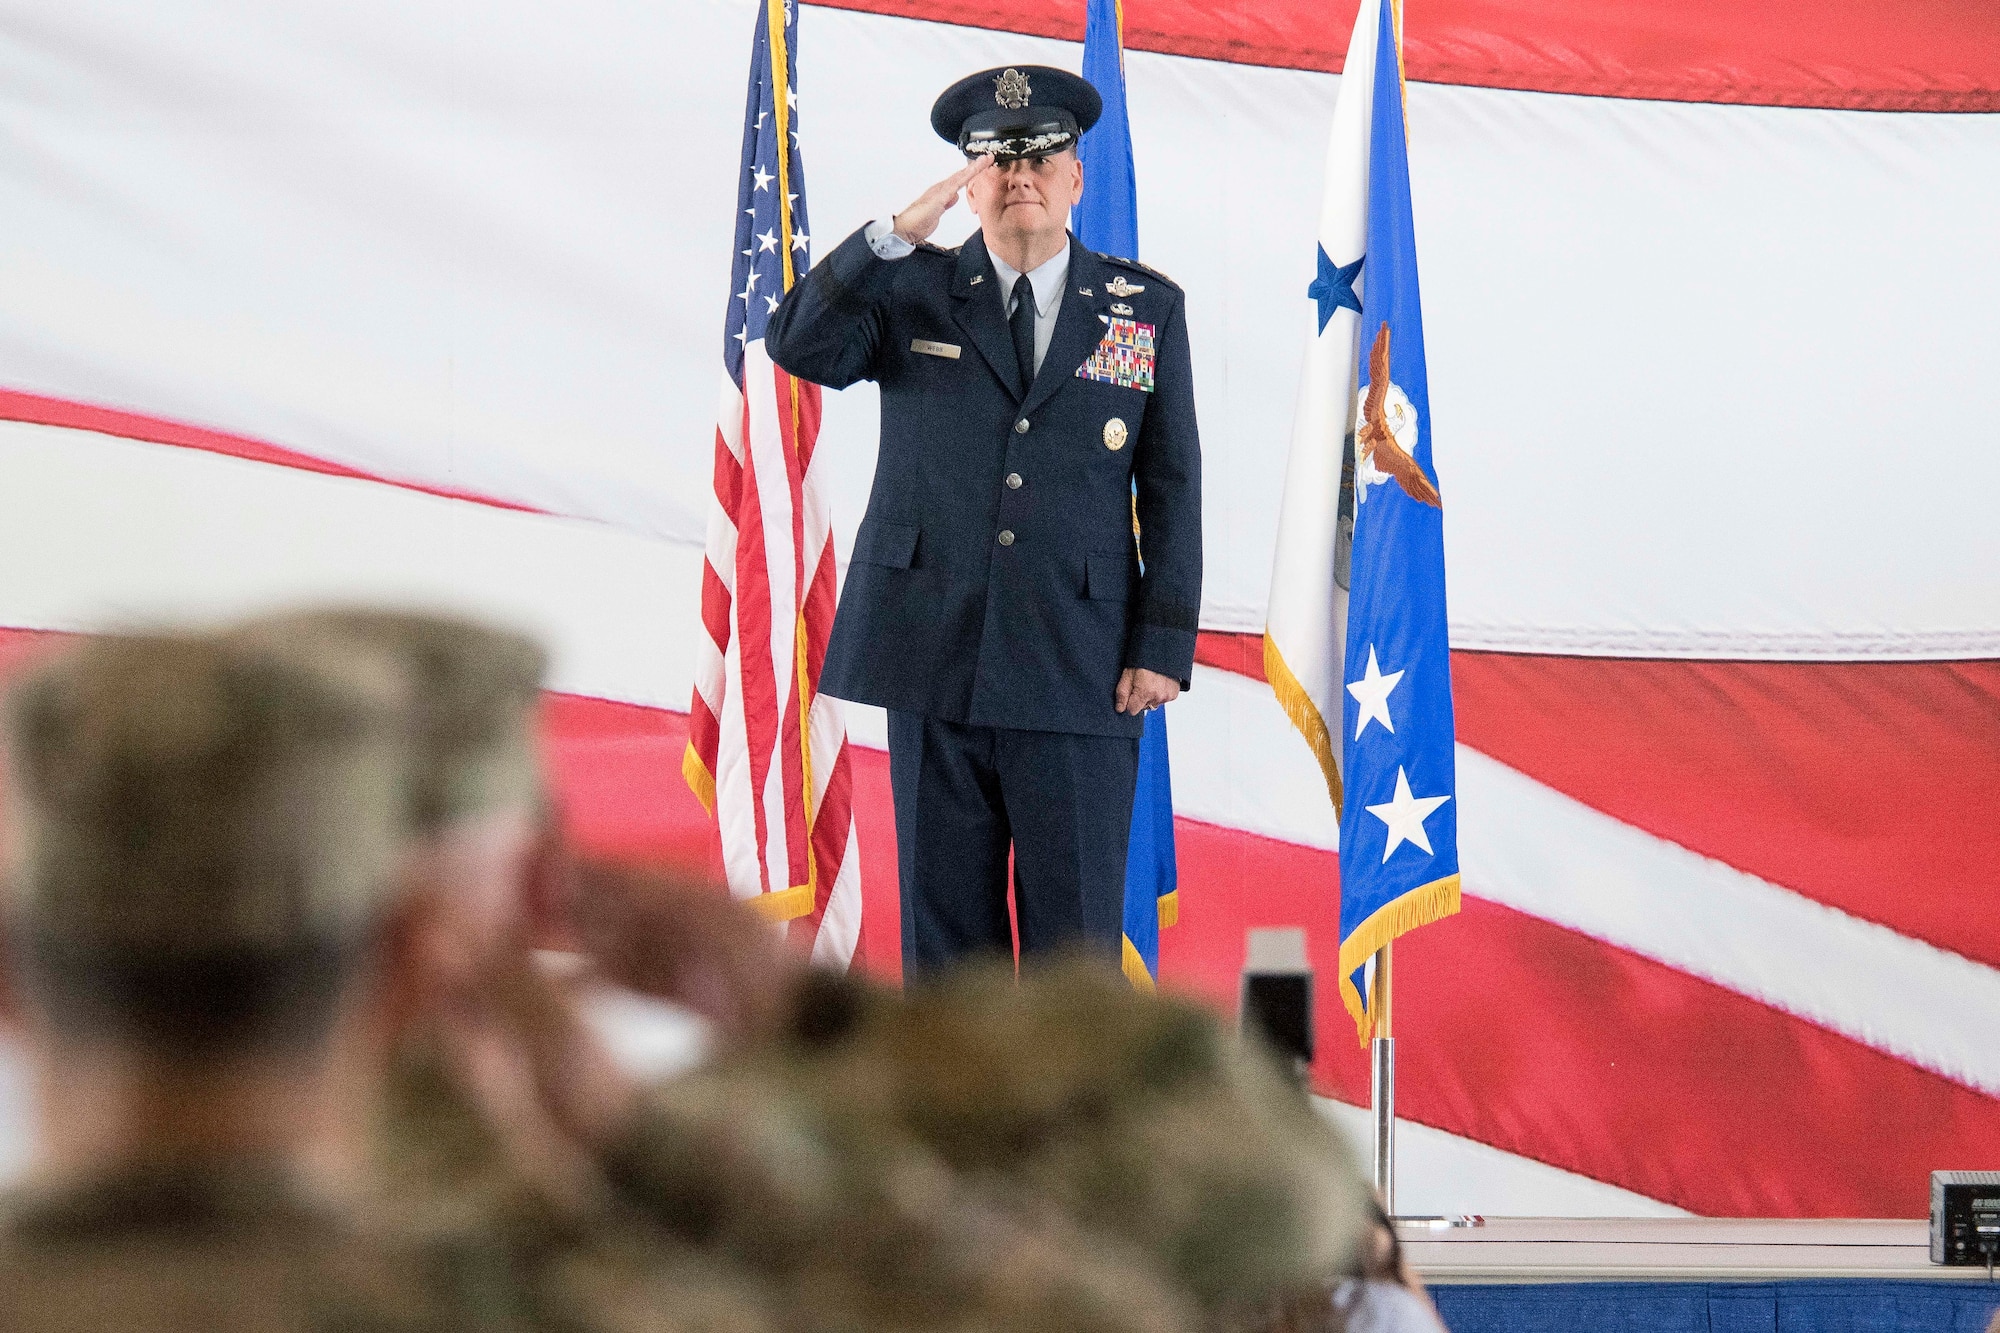 U.S. Air Force Lt. Gen. Brad Webb, commander of Air Education and Training Command, renders his first salute to the men and women of the First Command during AETC’s change of command ceremony at Joint Base San Antonio-Randolph, Texas, July 26, 2019. AETC operates more than 1,400 trainer, fighter and mobility aircraft, 23 wings, 10 bases and five geographically separated groups. (U.S. Air Force photo by Sean M. Worrell)